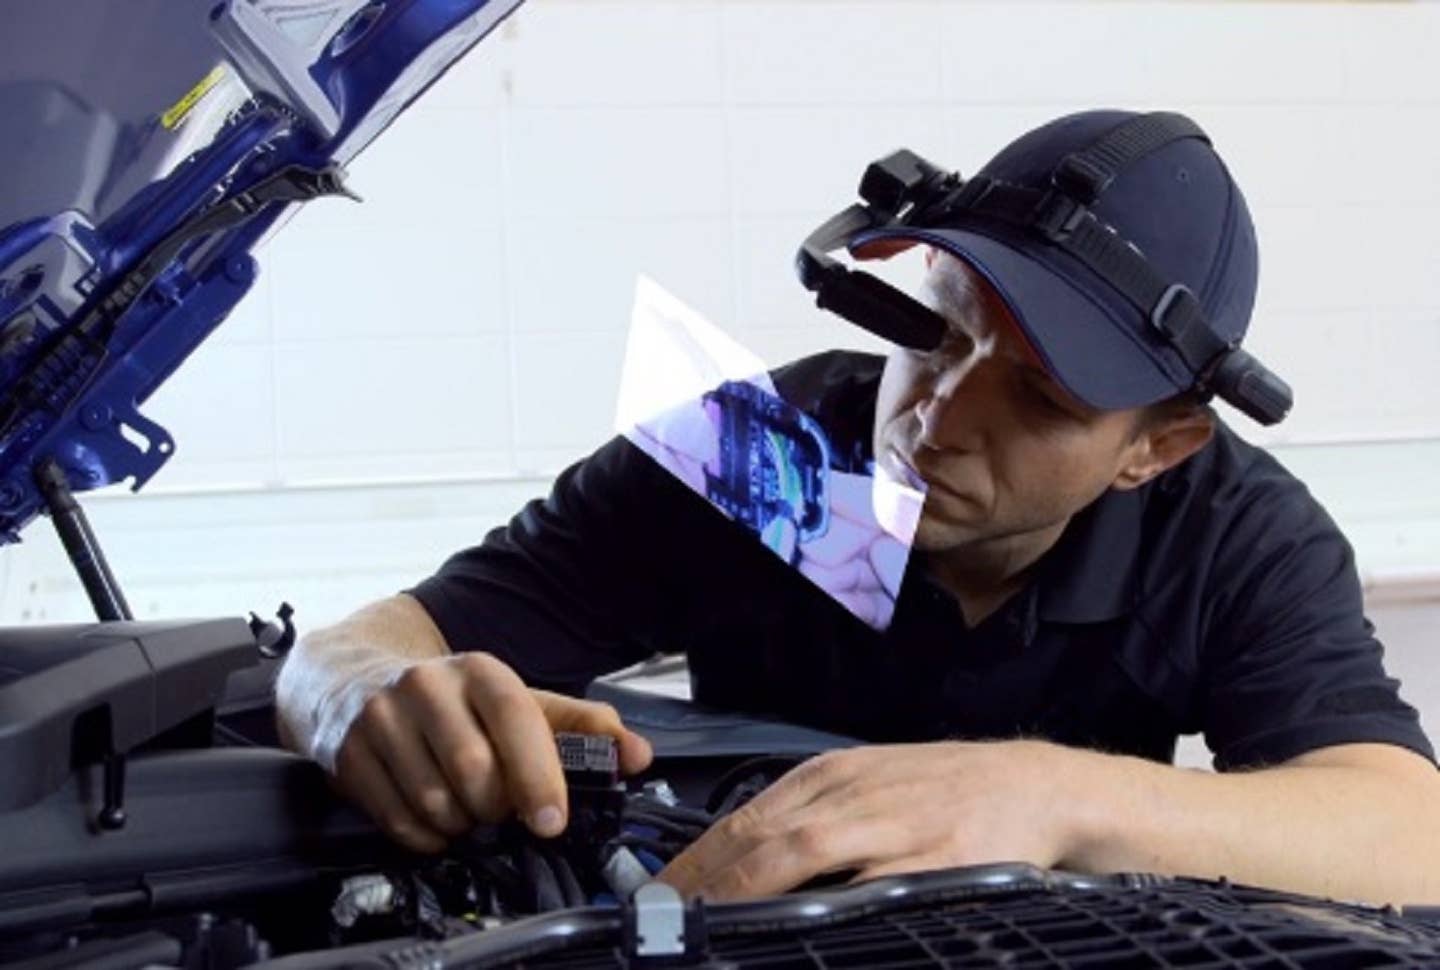 A BMW mechanic uses smart glasses during a repair.